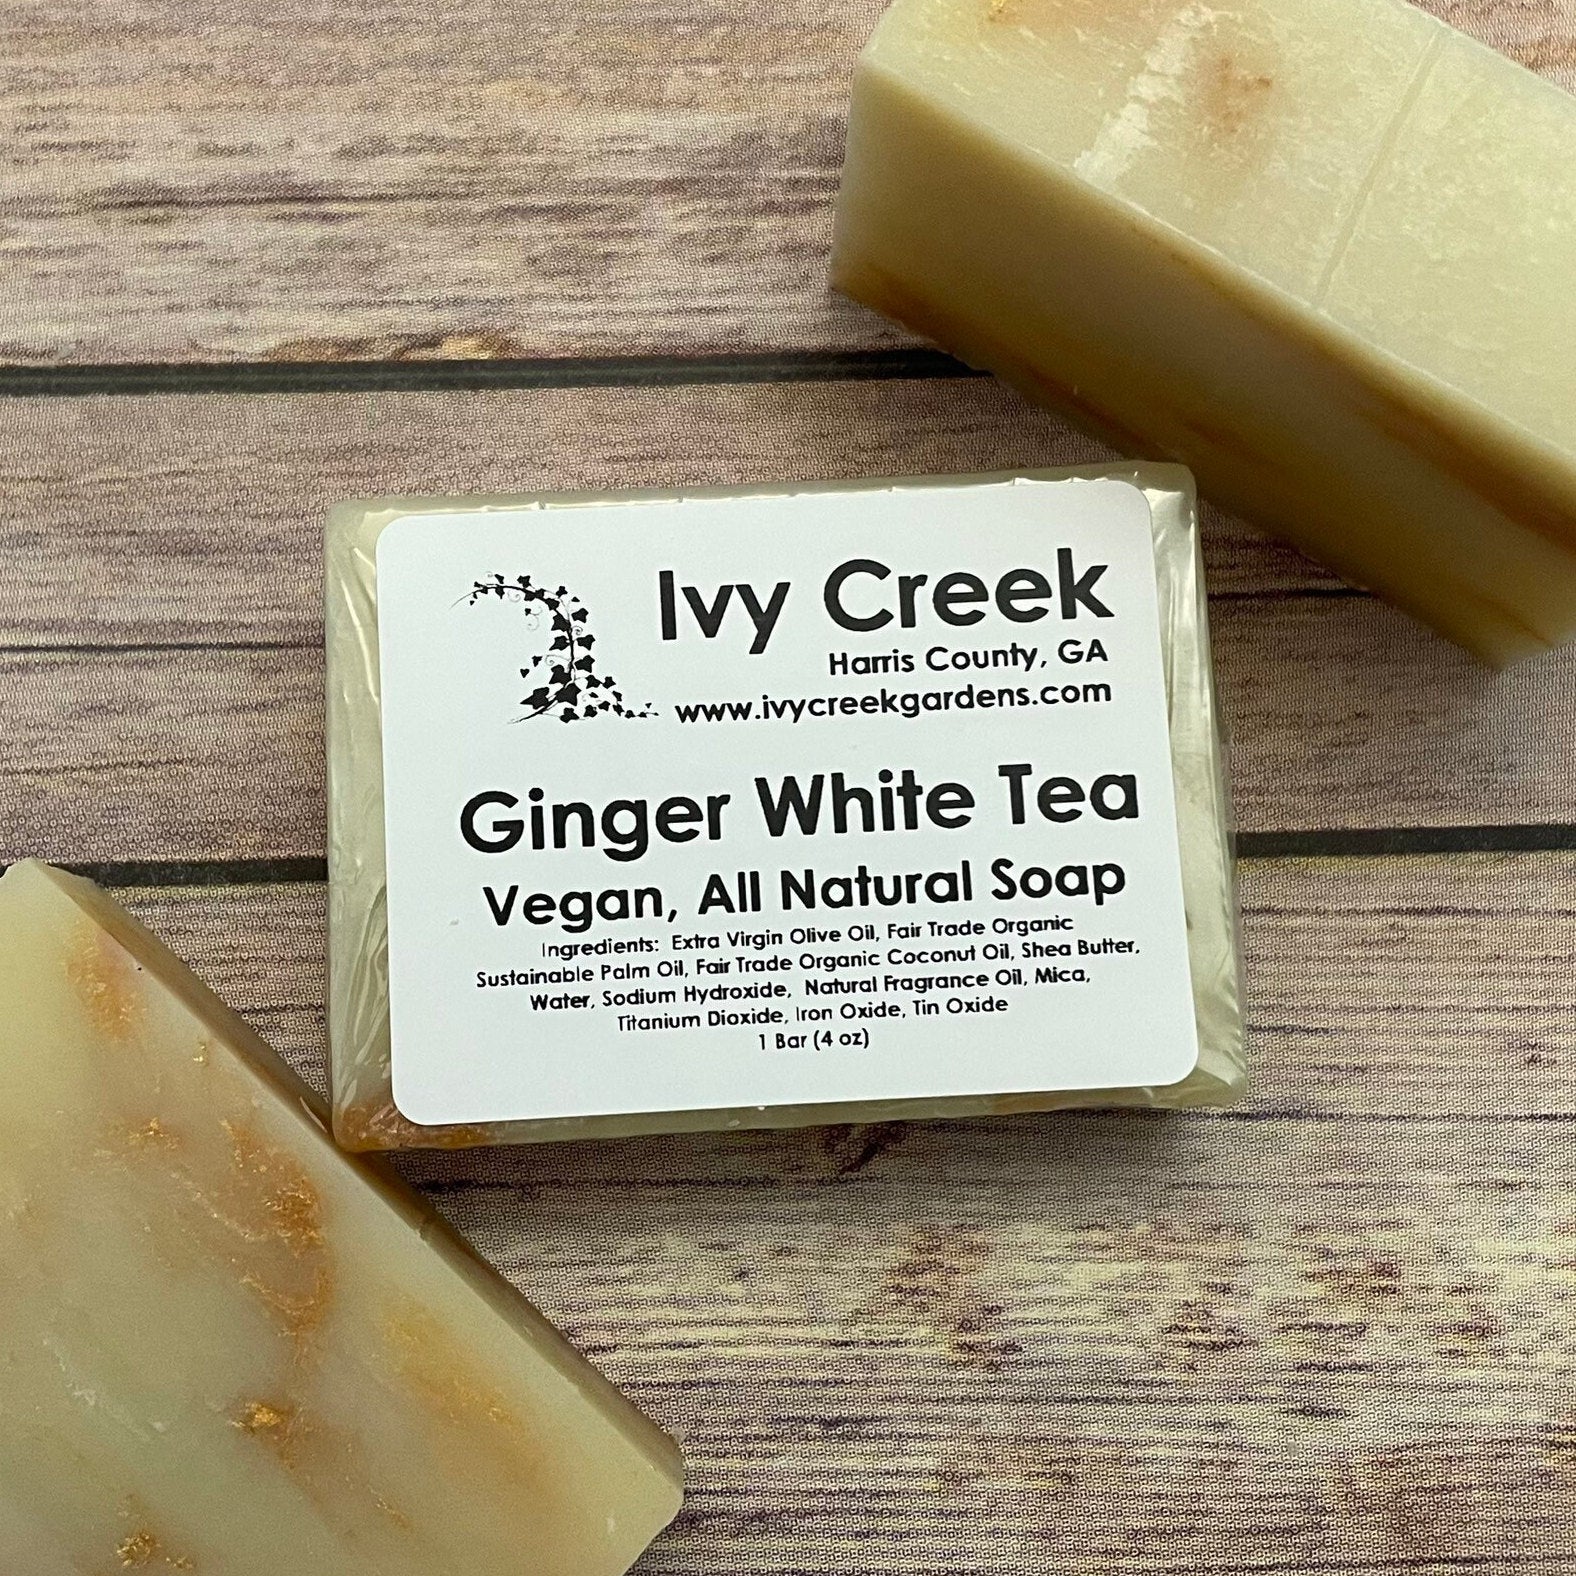 Ivy Creek Ginger White Tea Soap, Vegan Soap, Natural Soap, Holistic Soap, Gifts for Her, Gifts for Mom, Fair Trade Soap - 4oz